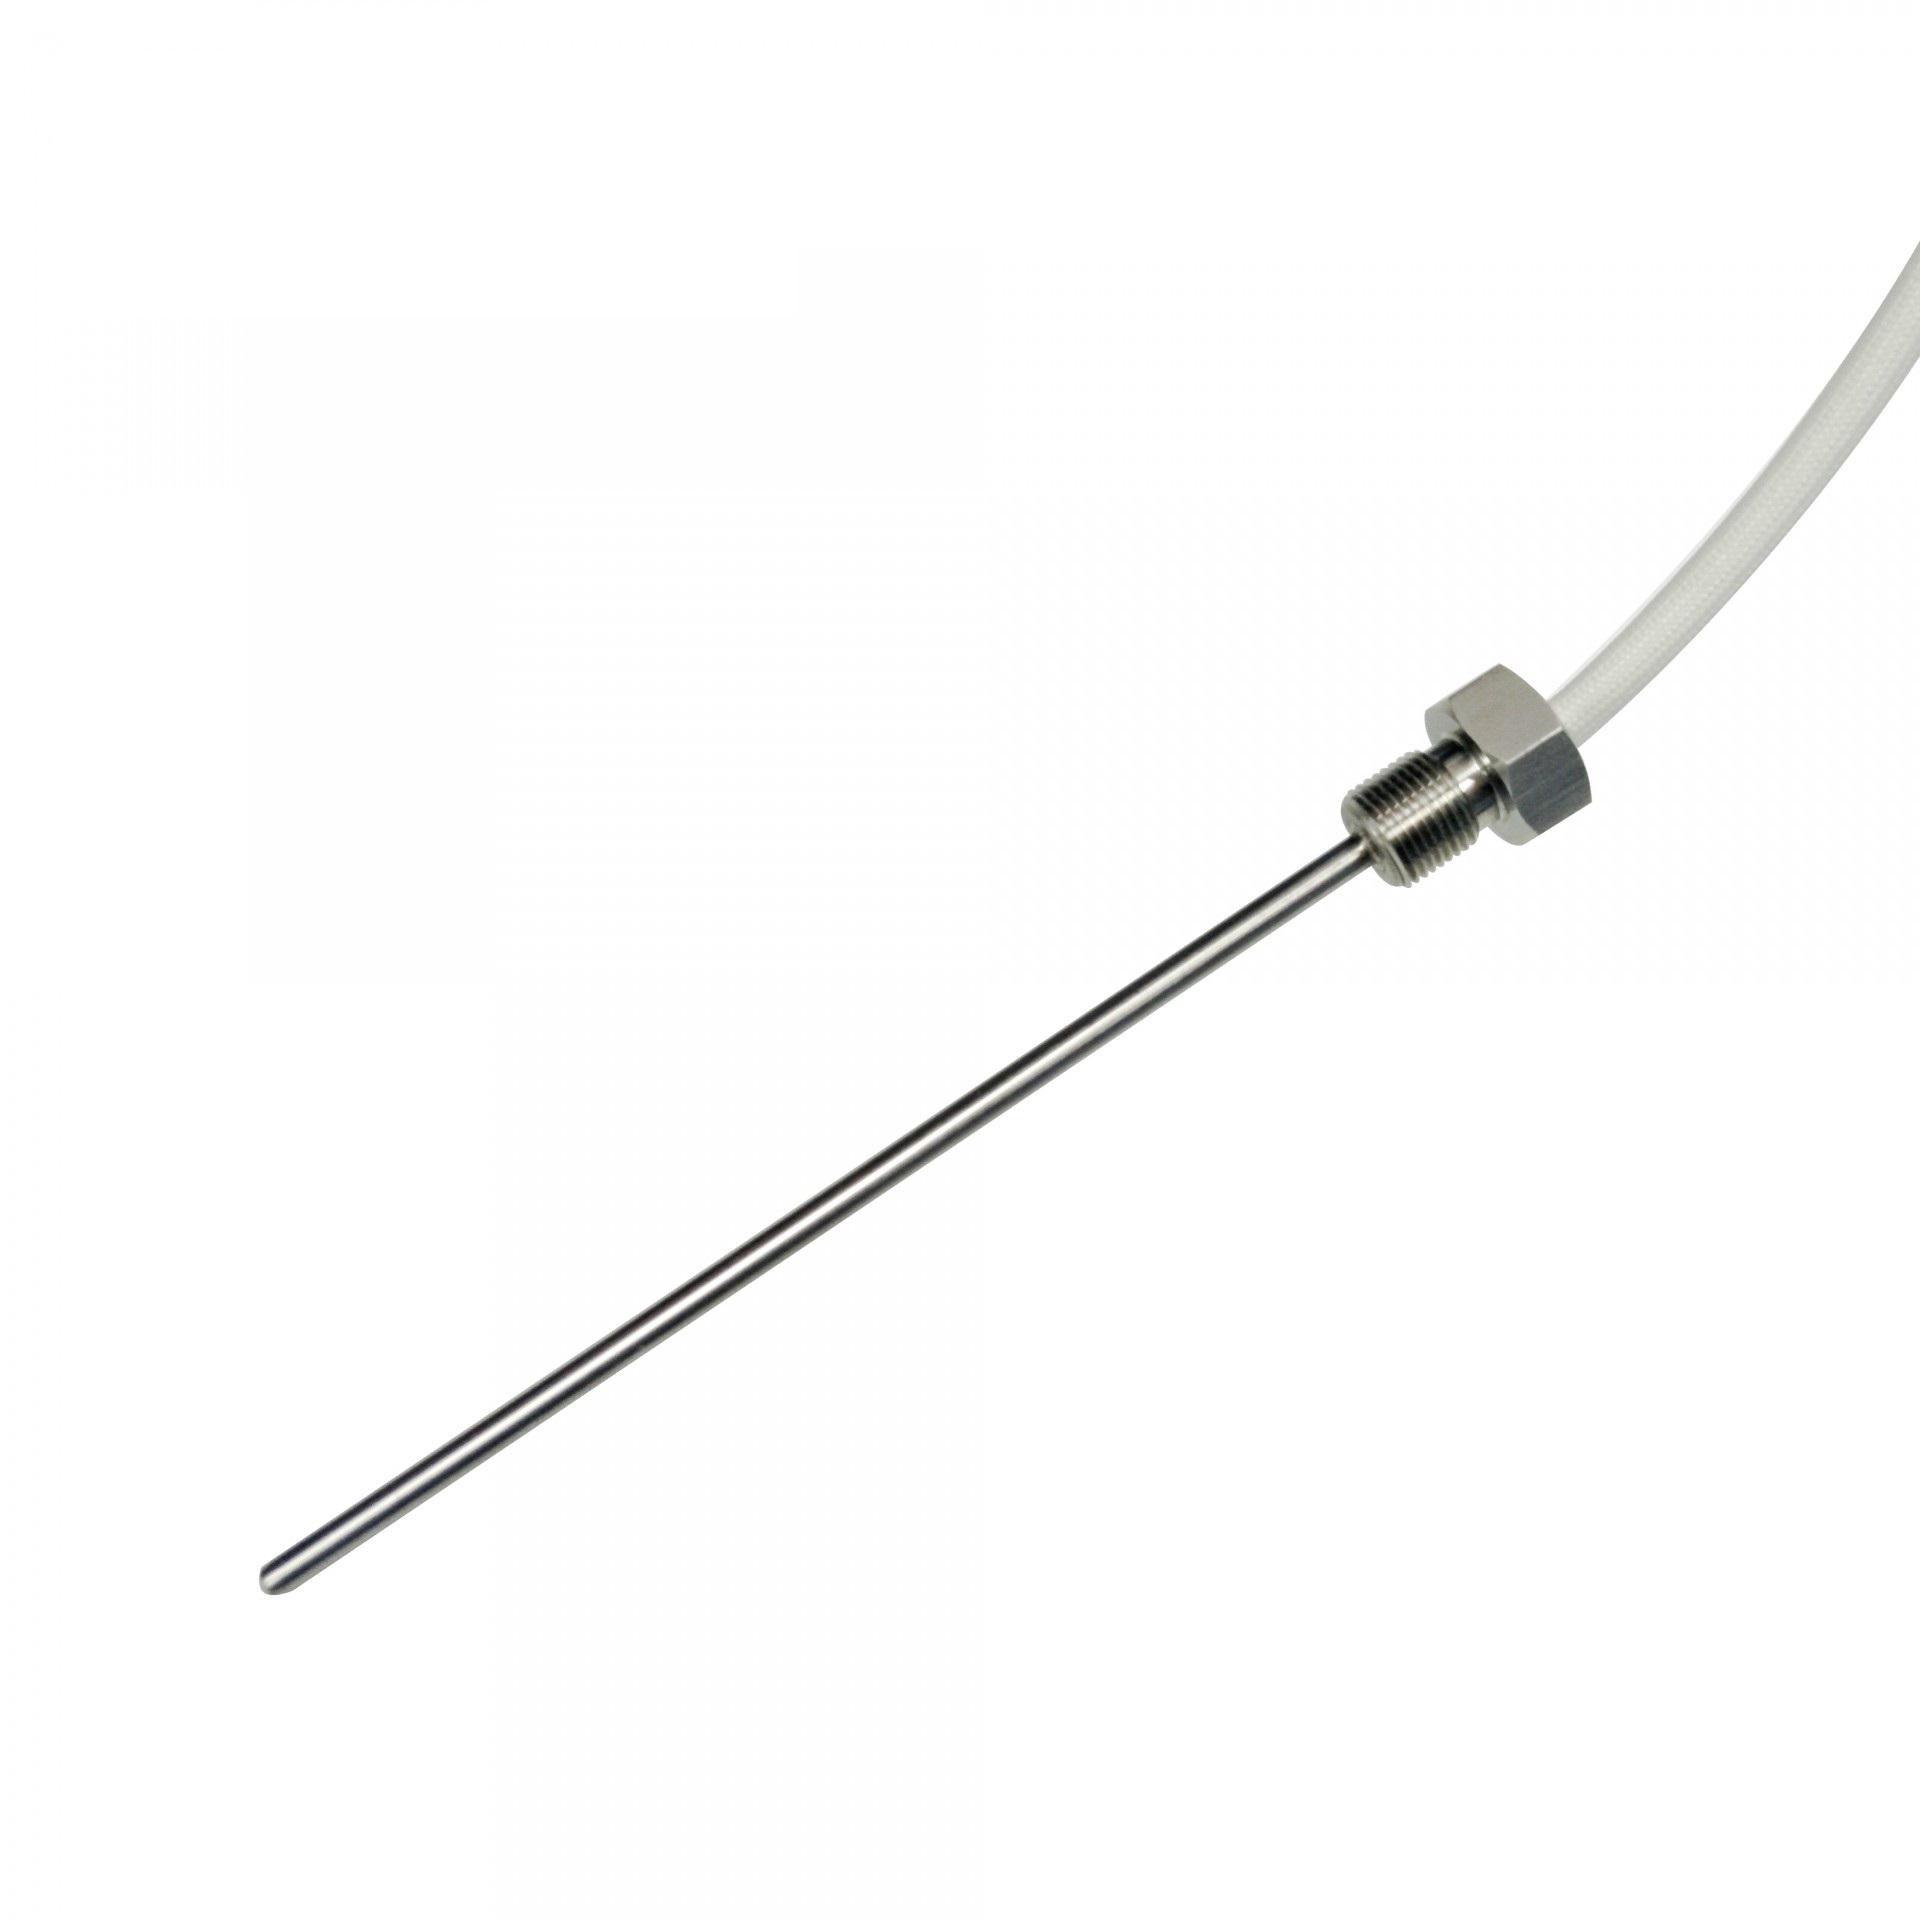 Used in oil and water temperature monitoring sensors